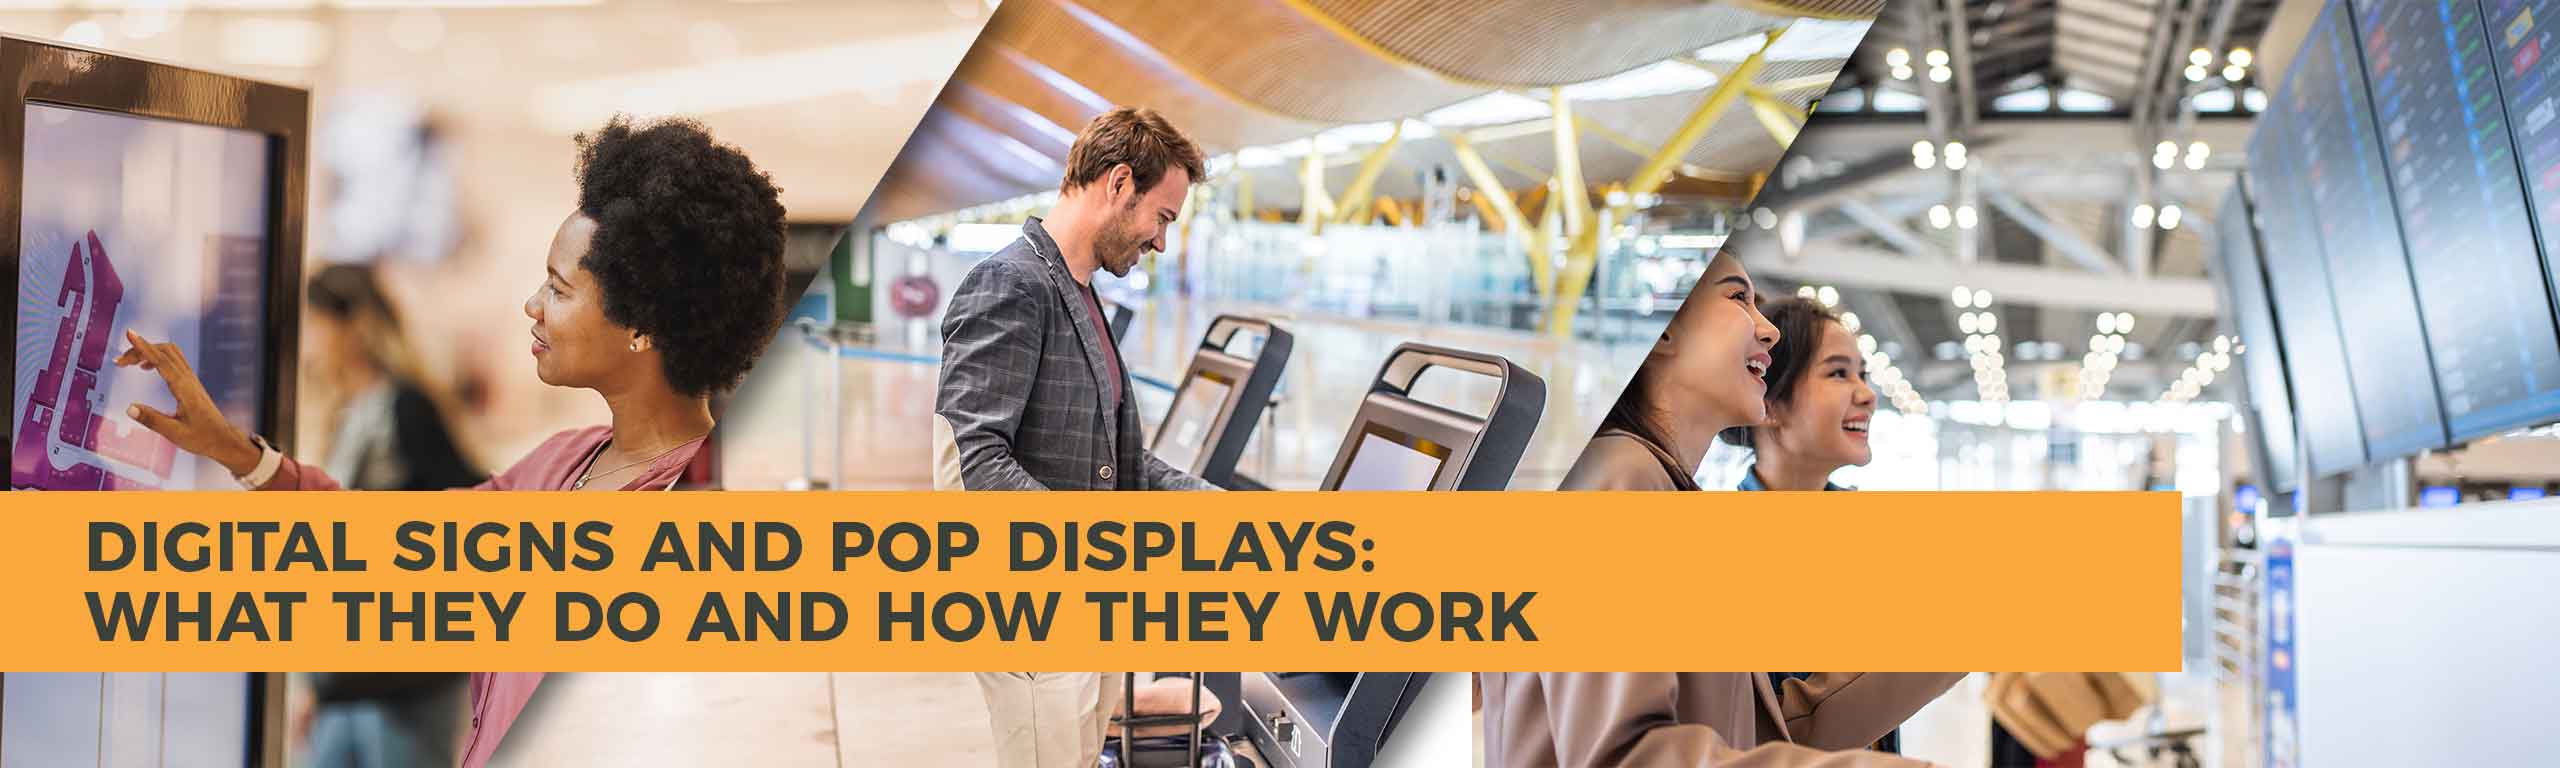 Digital Signs and POP Displays: What They Do and How They Work